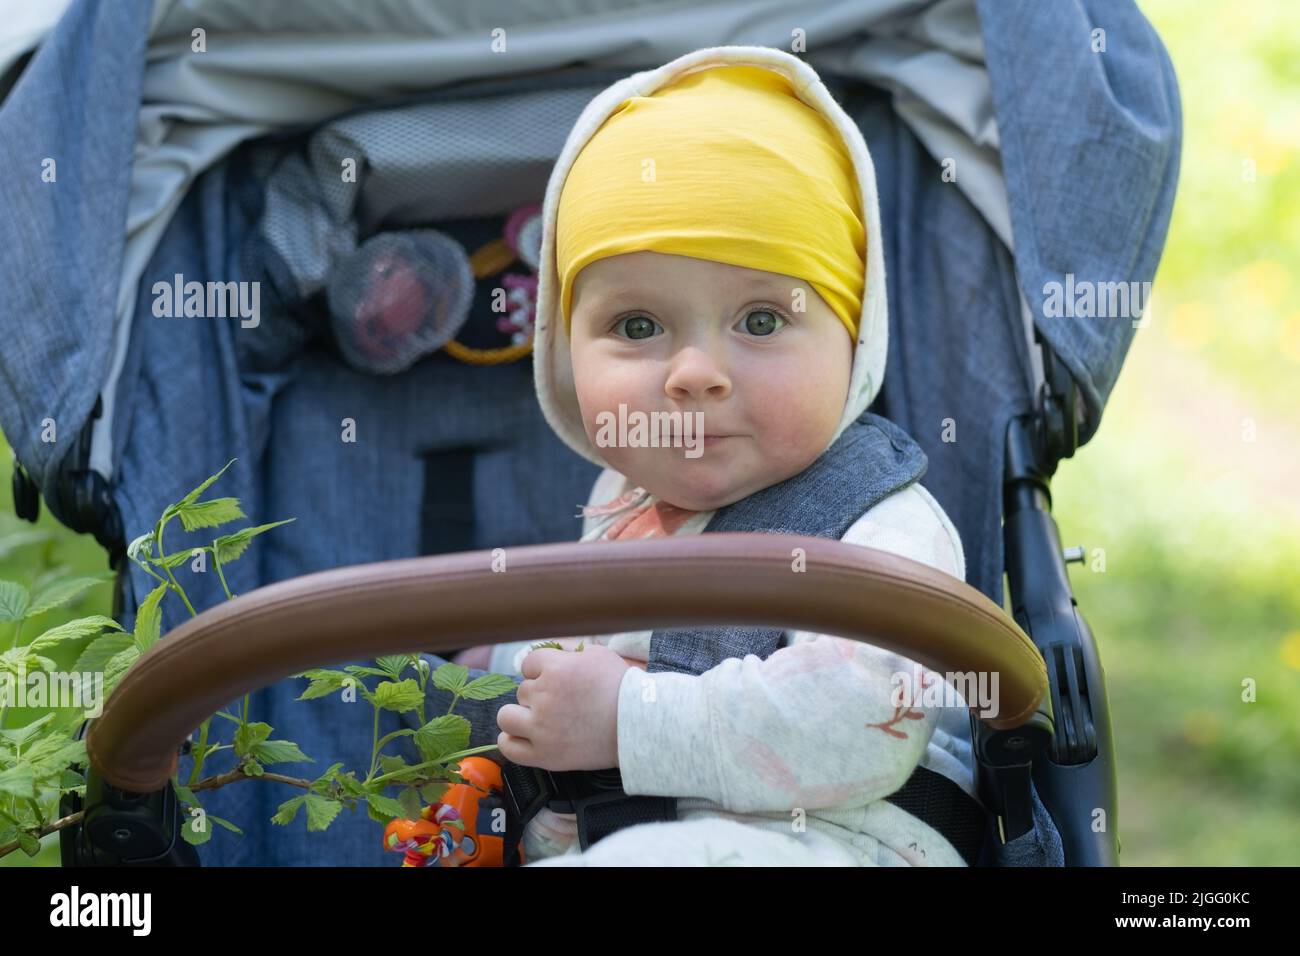 Baby girl sitting in a stroller looking on green leaves. Stock Photo